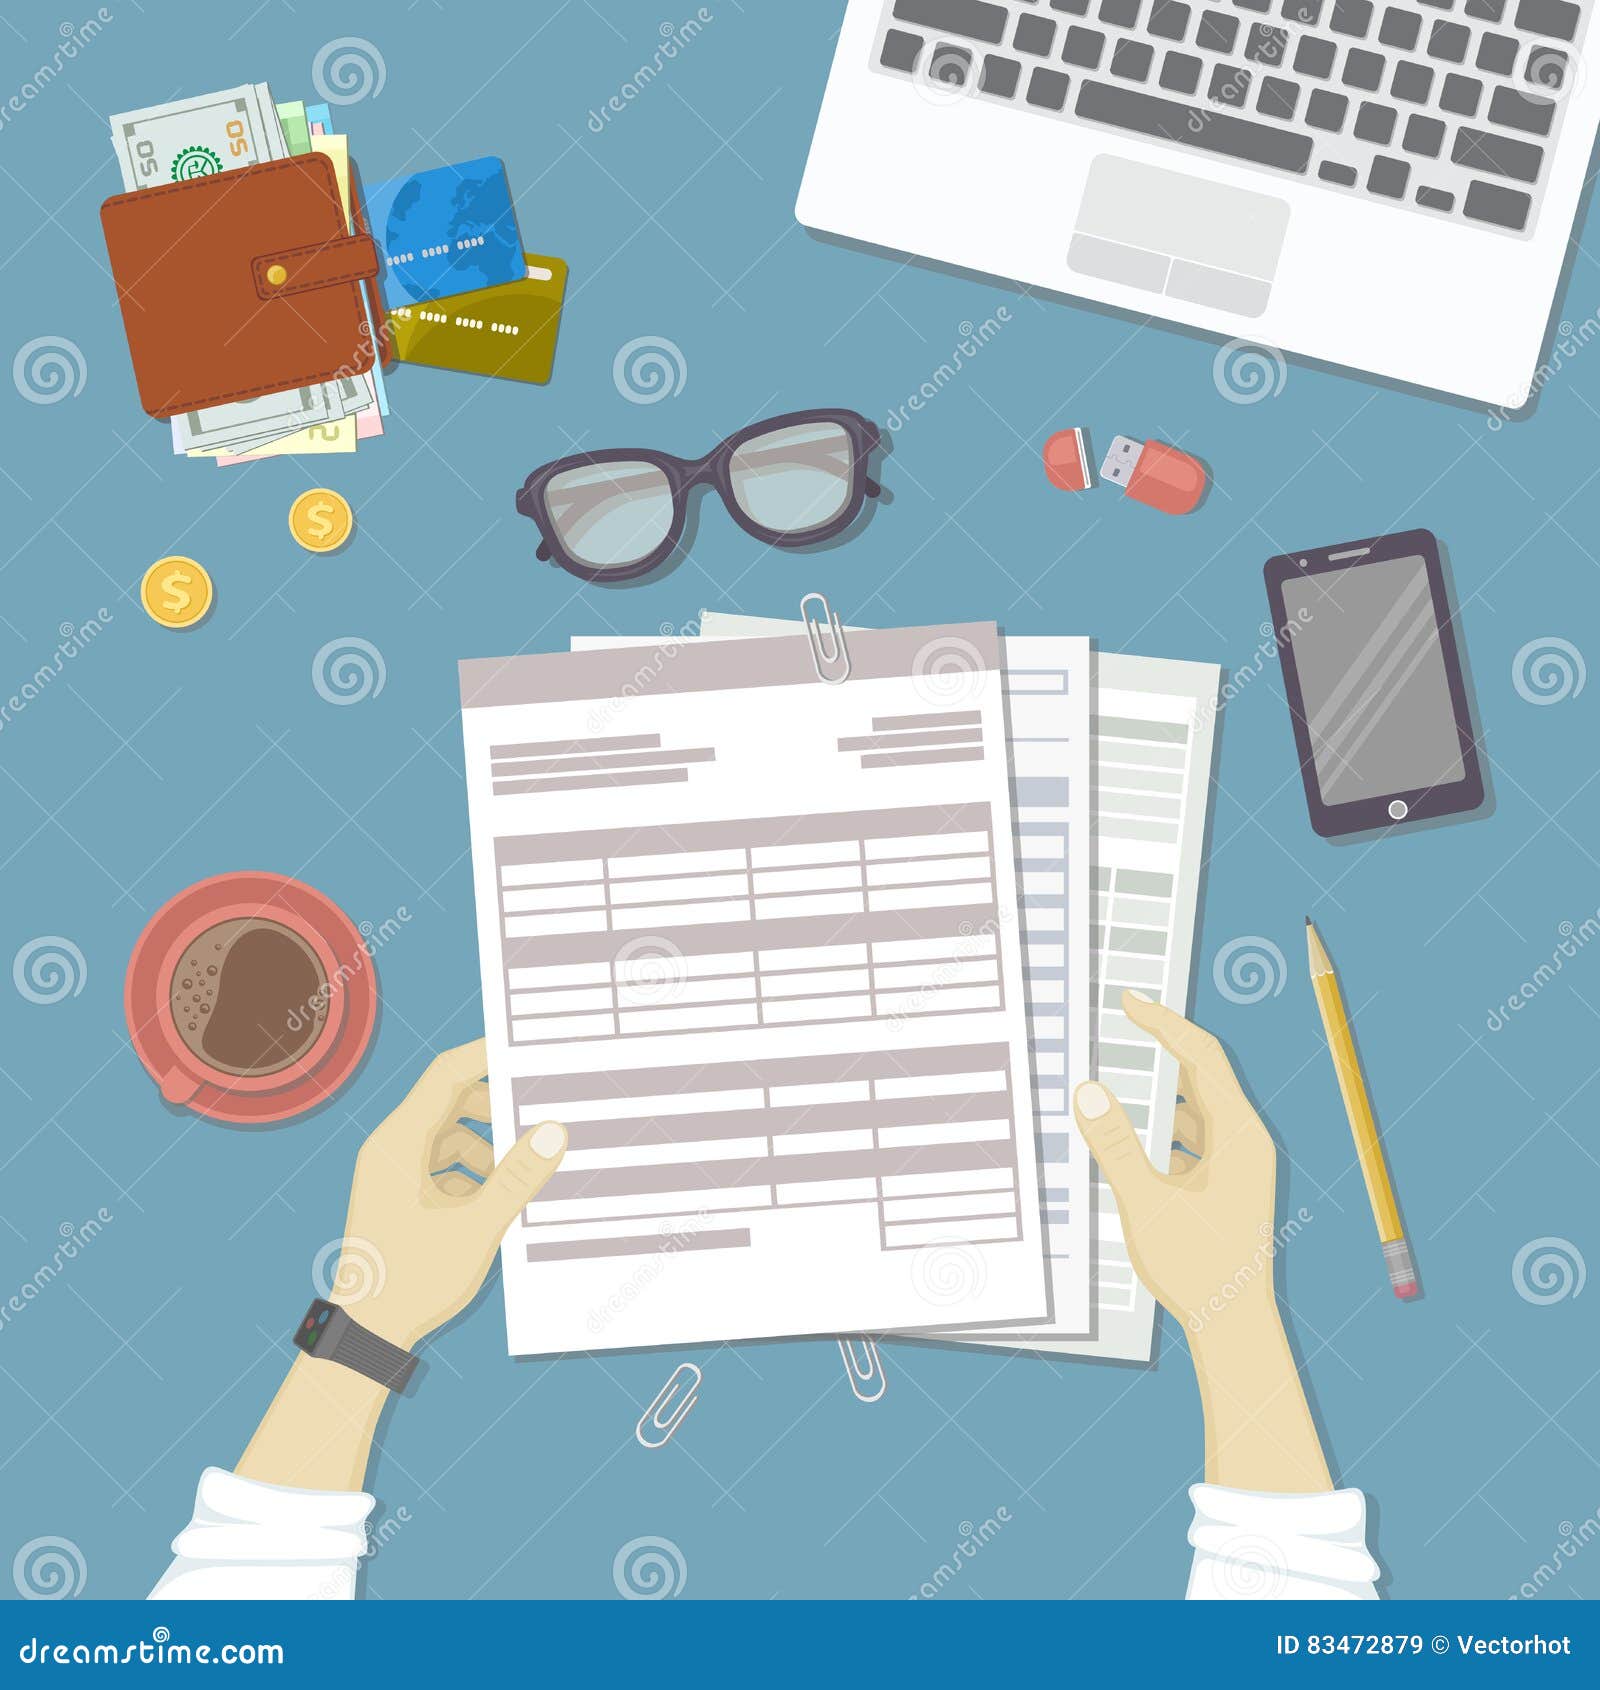 man working with documents. human hands hold the accounts, bills, tax form. workplace with papers, blanks, forms, phone, wallet